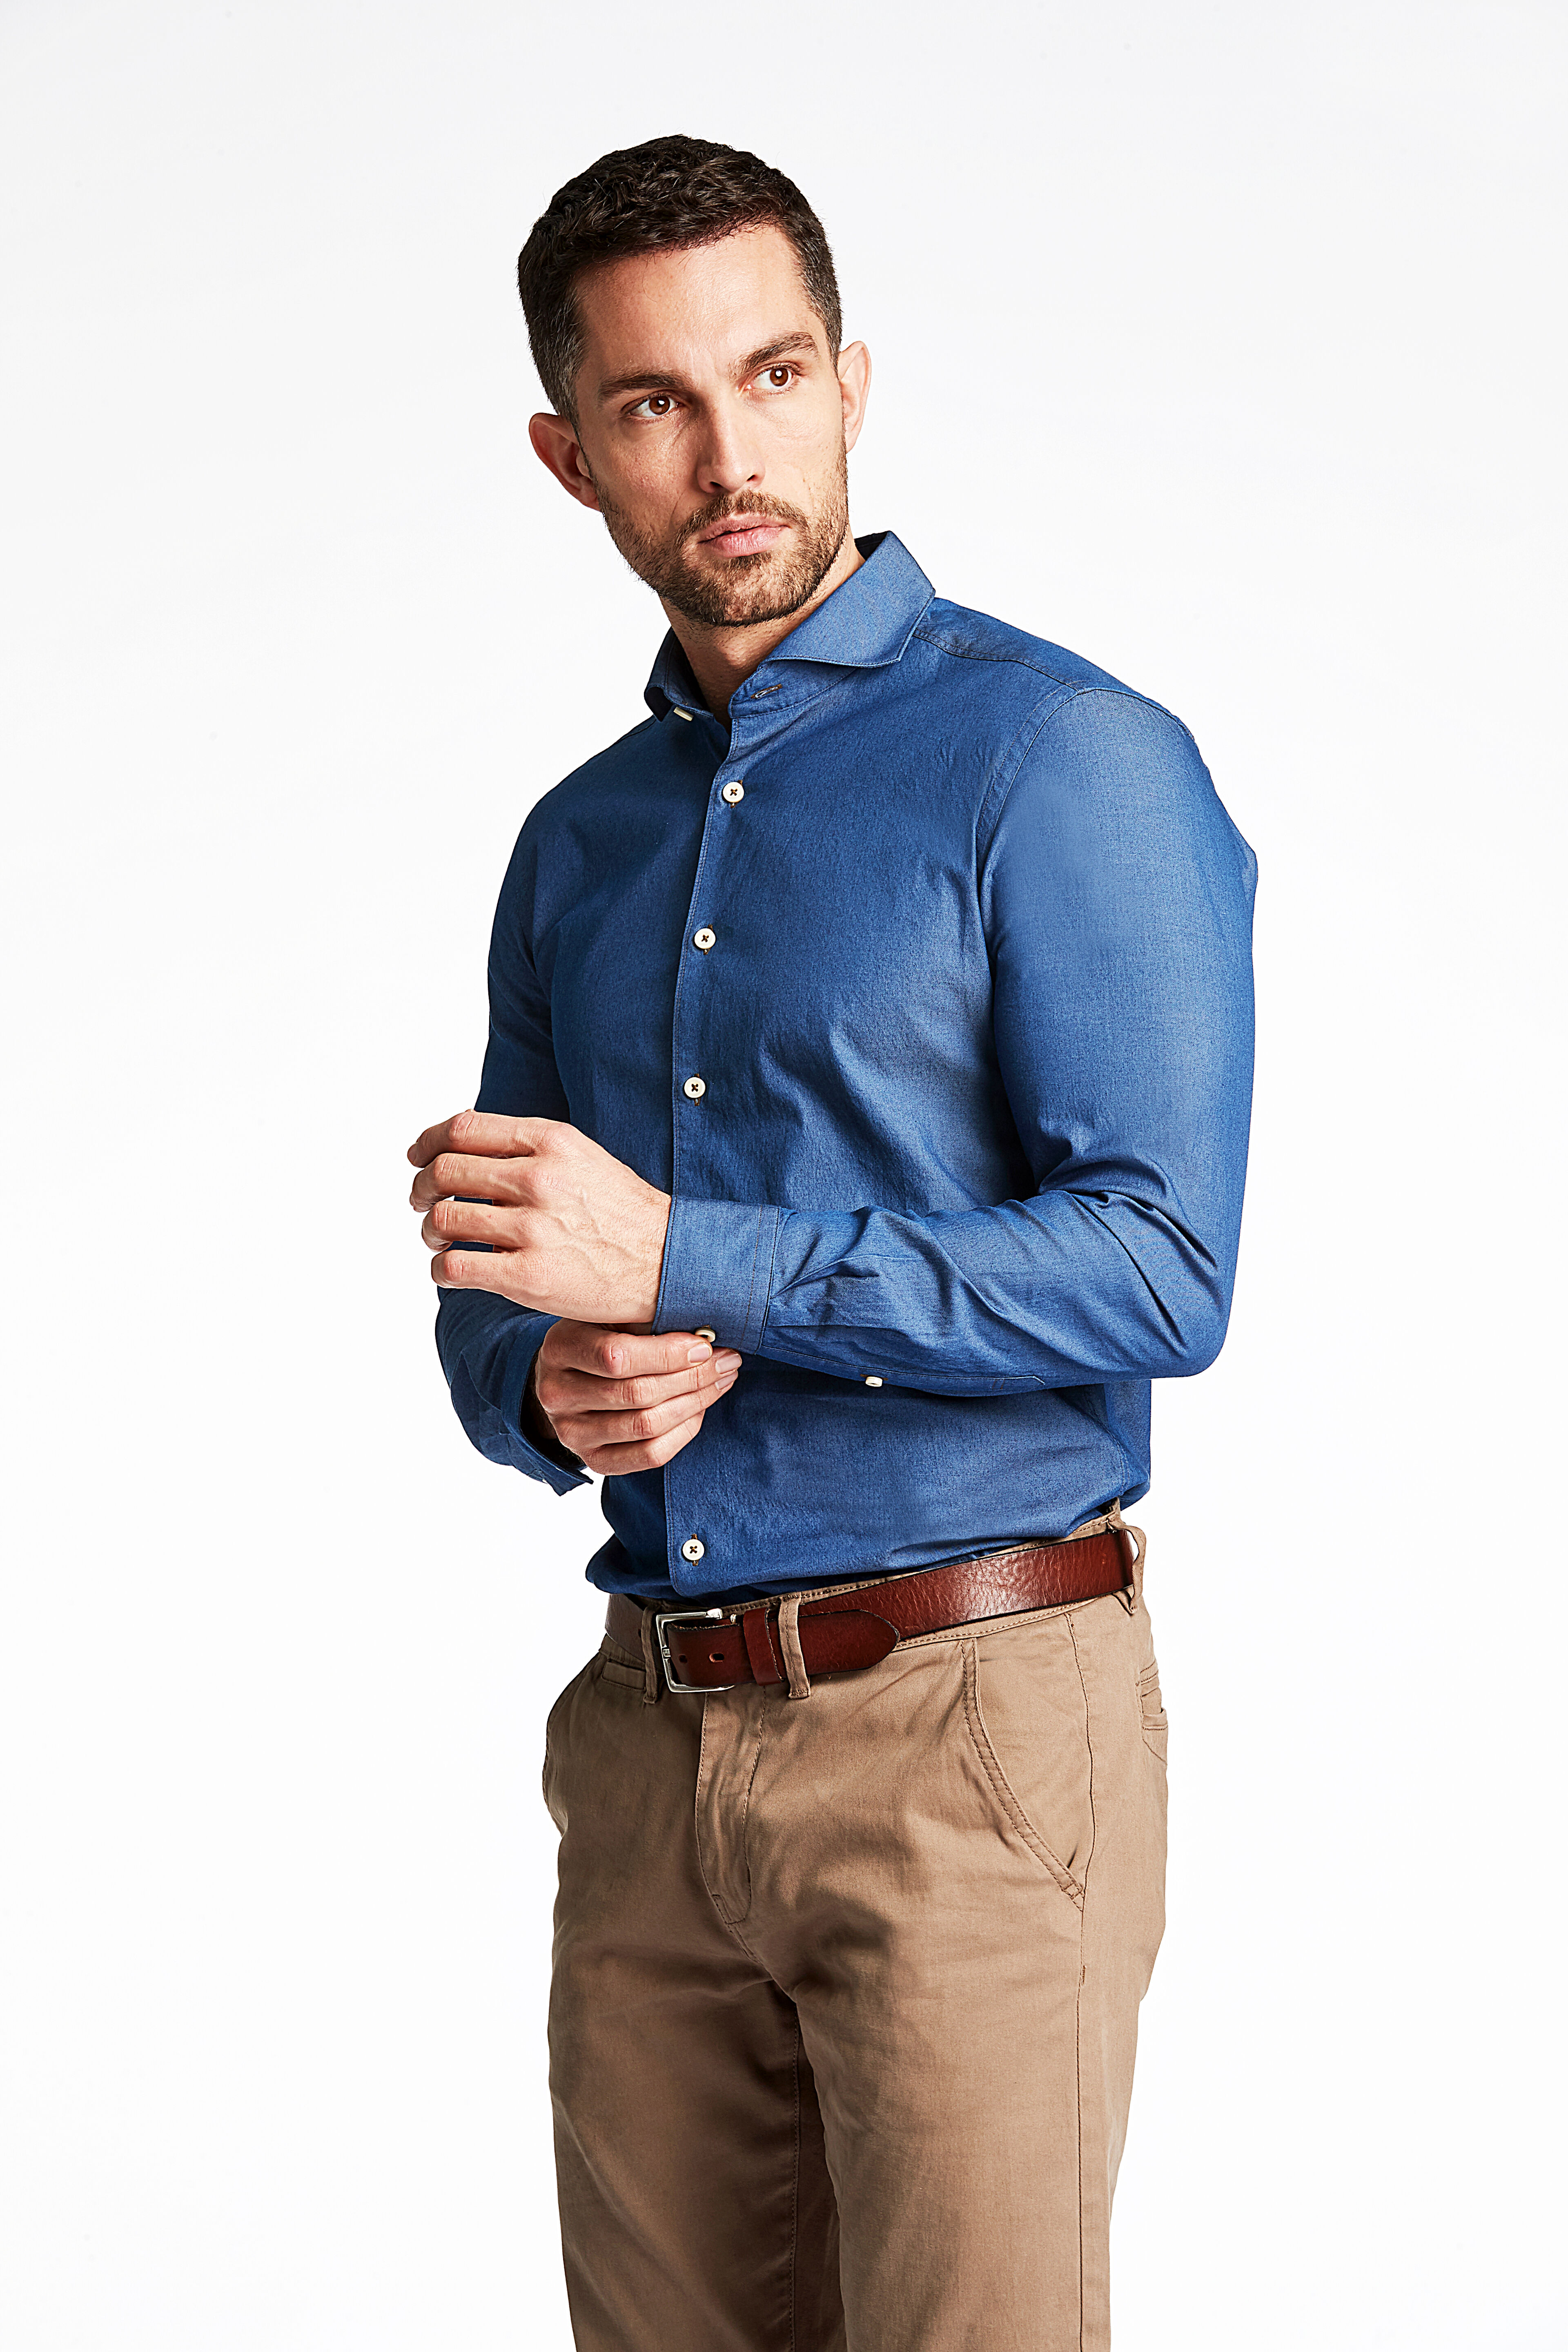 1927 Business casual shirt | Slim fit